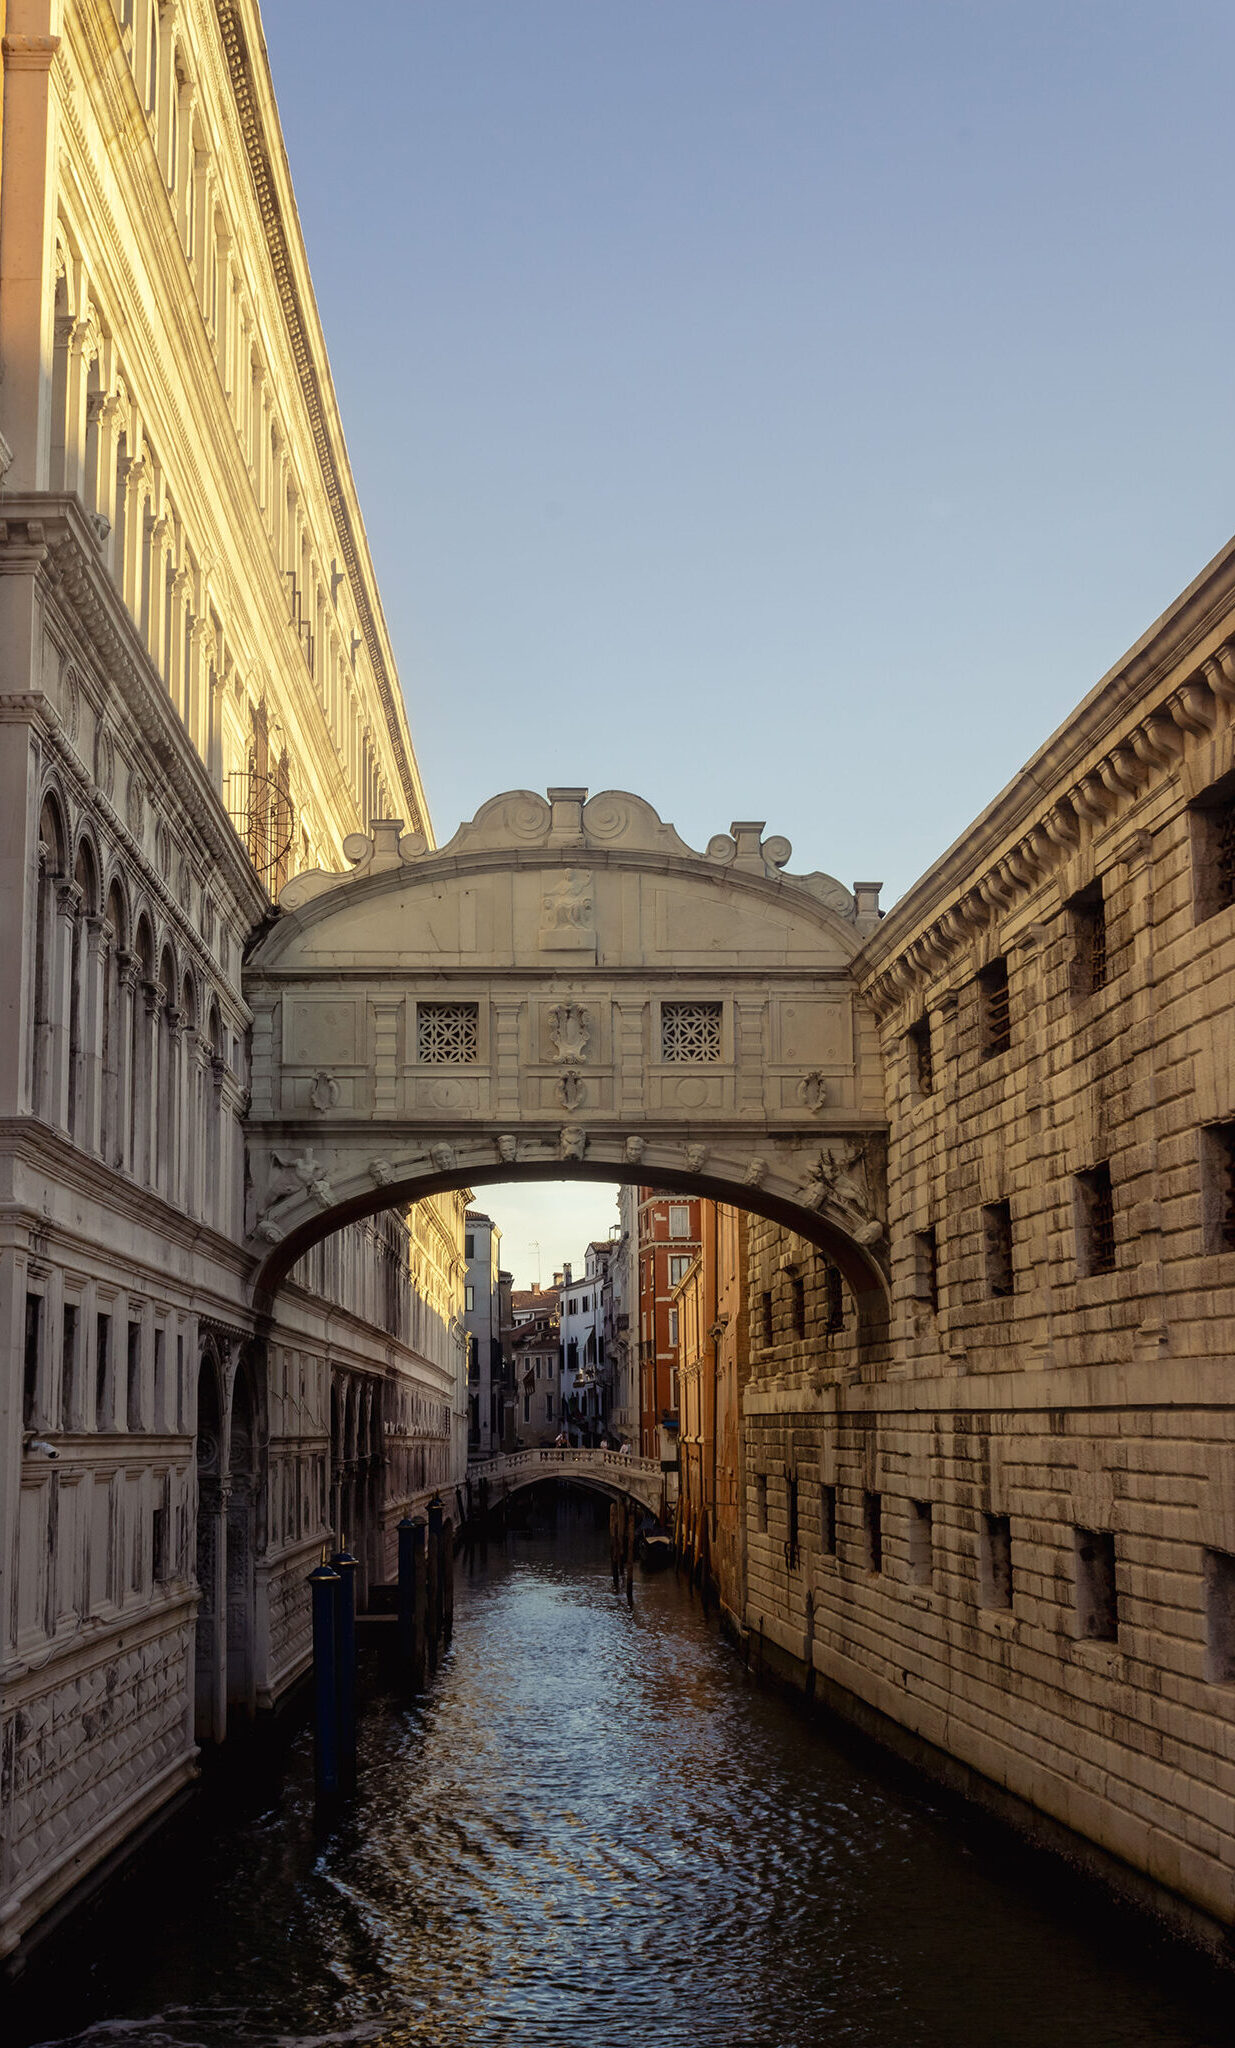 Depicts the bridge of sighs in Venice, Italy. The light of the rising sun casts interesting shadows across the bridge while the light brings out the vibrancy of the colours surrounding it.